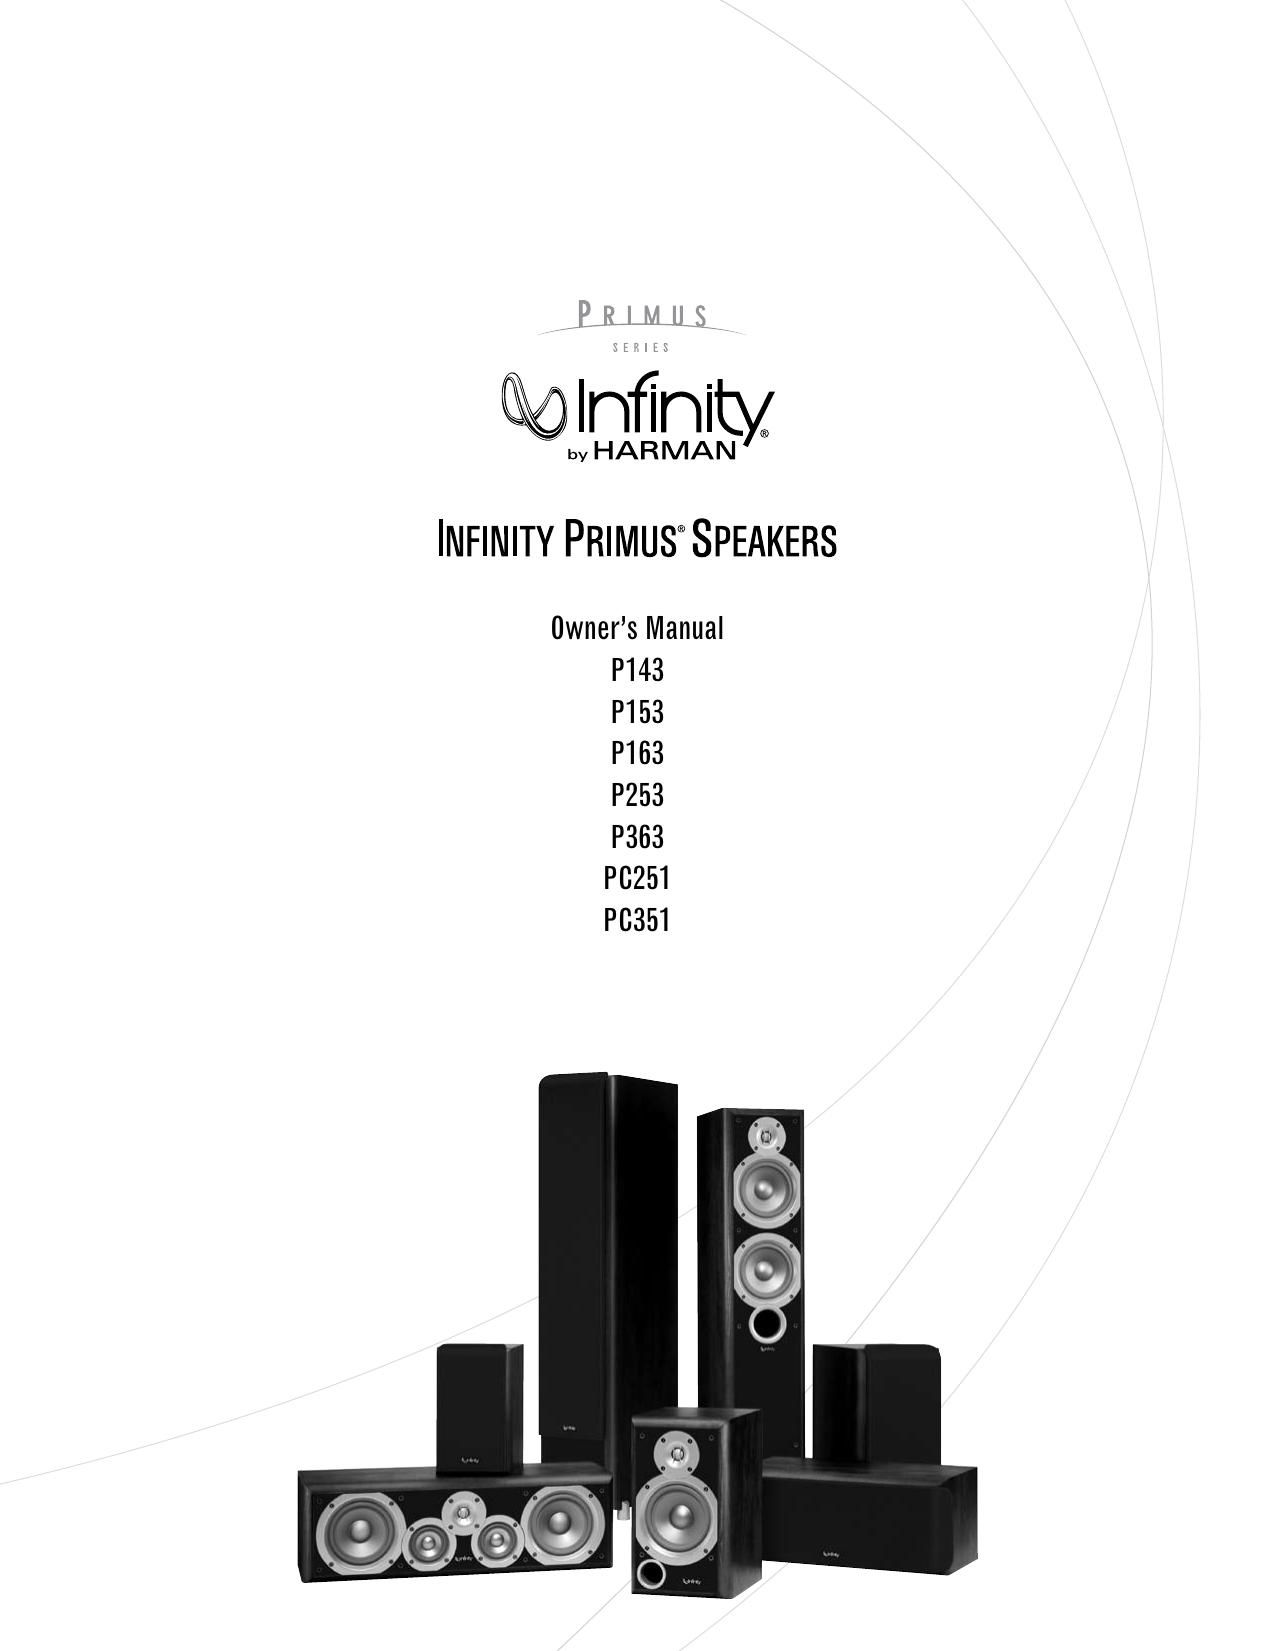 Infinity Primus P 143 Owners Manual